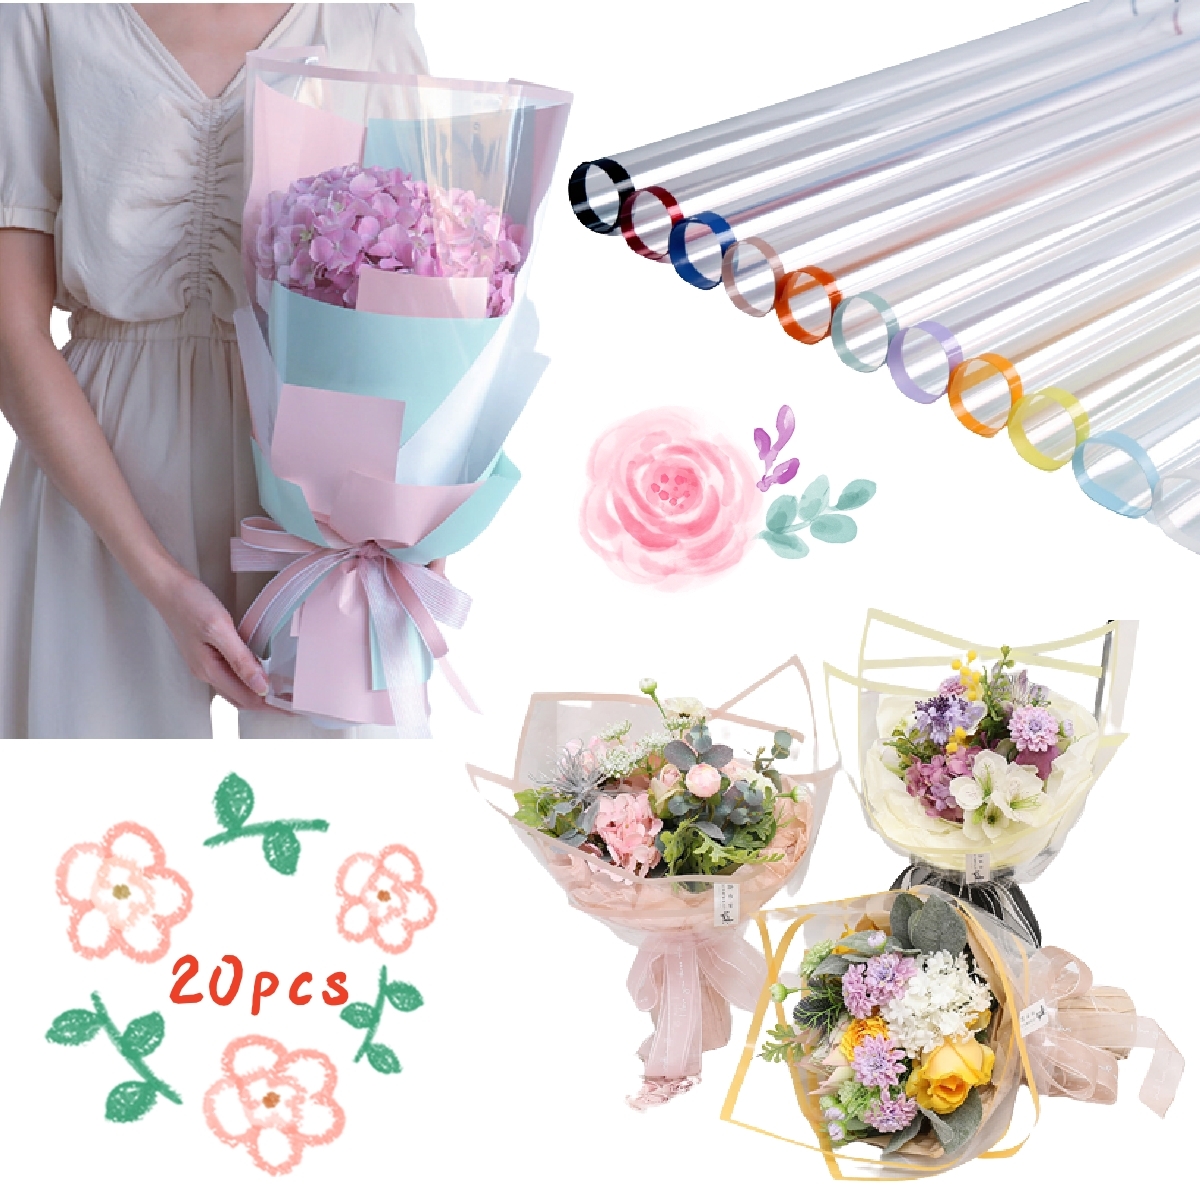 Cellophane Waterproof Colorful Border Transparent Flower Wrapping